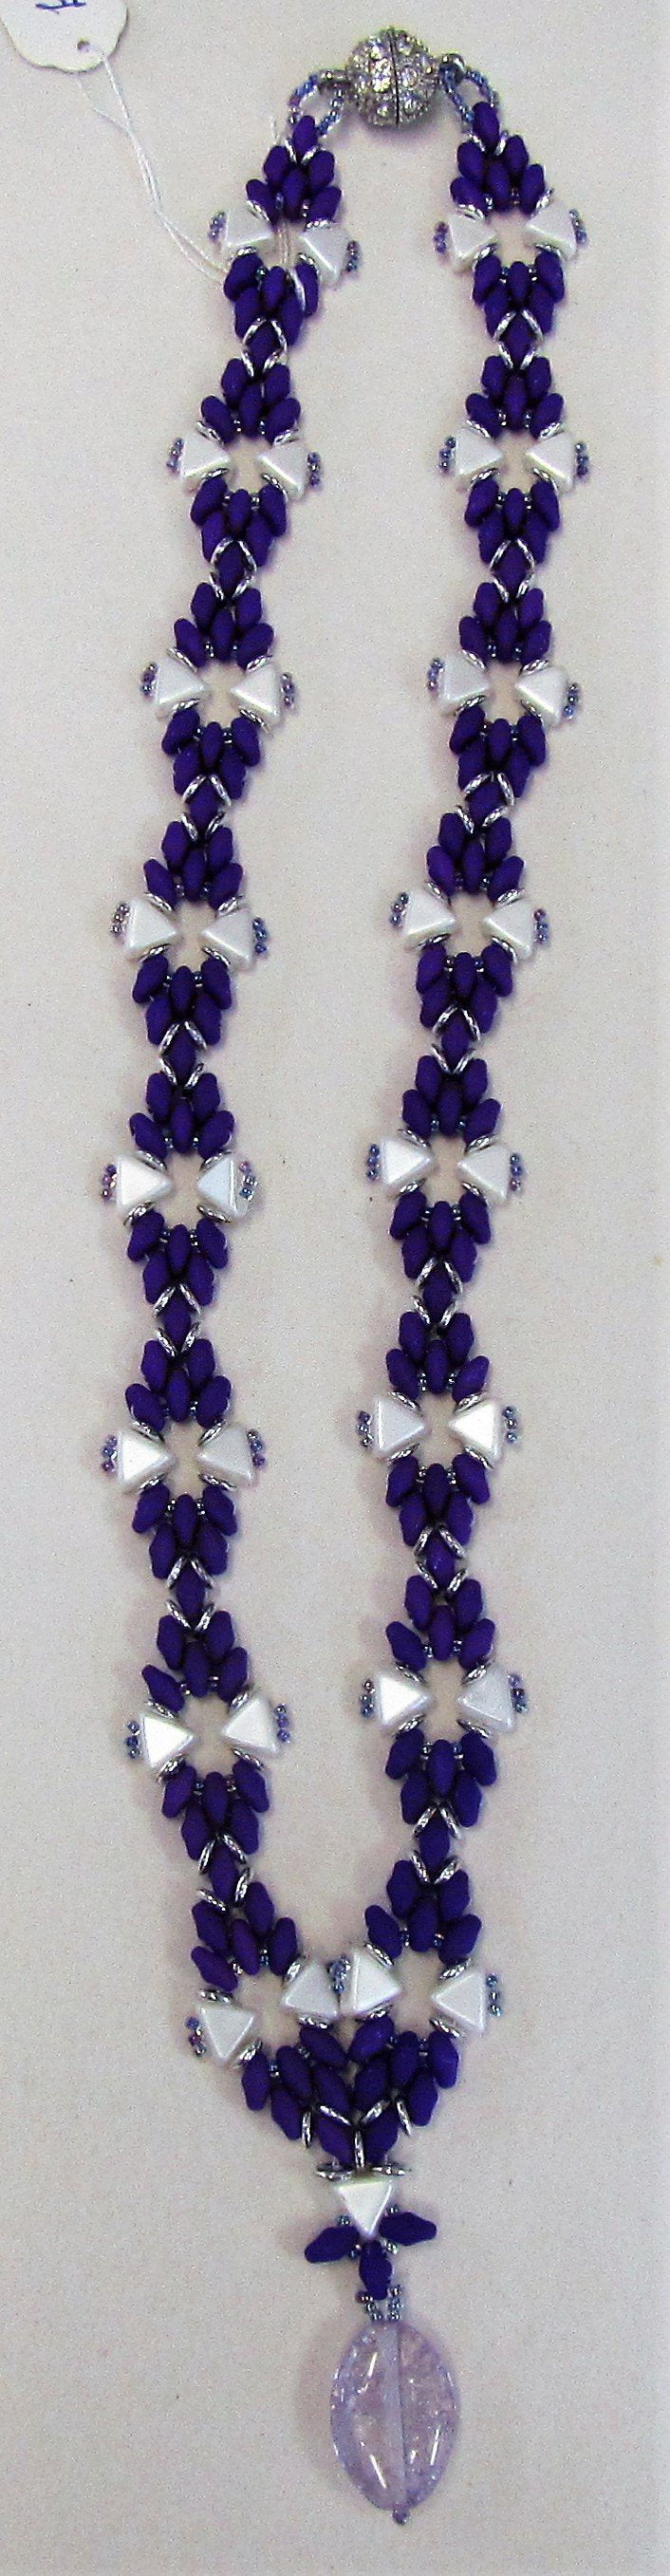 Handcrafted purple cord and white beaded necklace